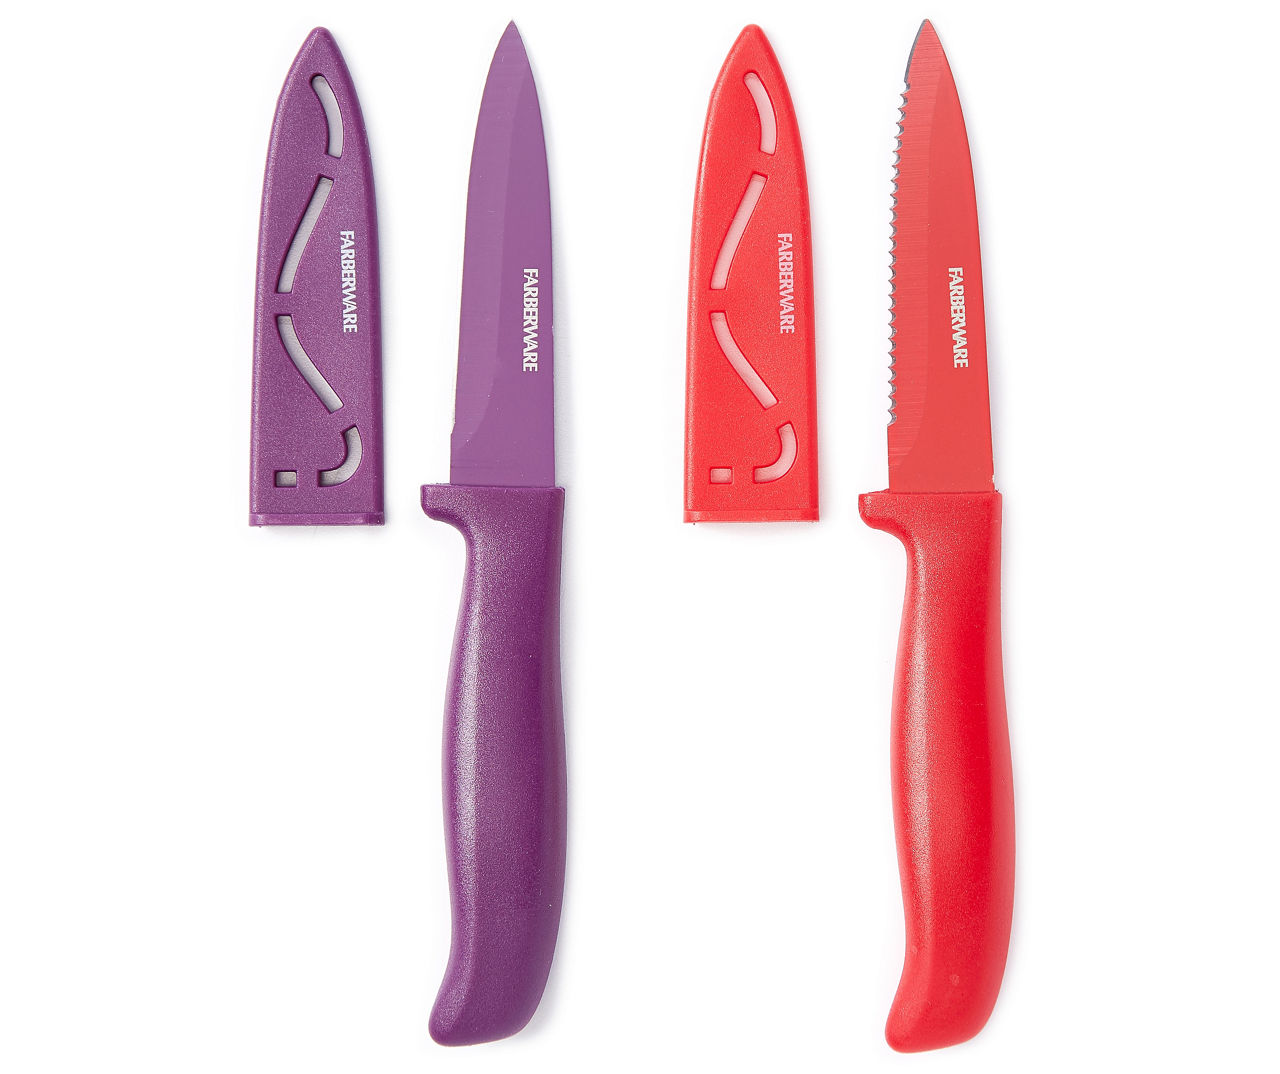 Farberware Color Series Serrated Paring & Utility Knife 2-Piece